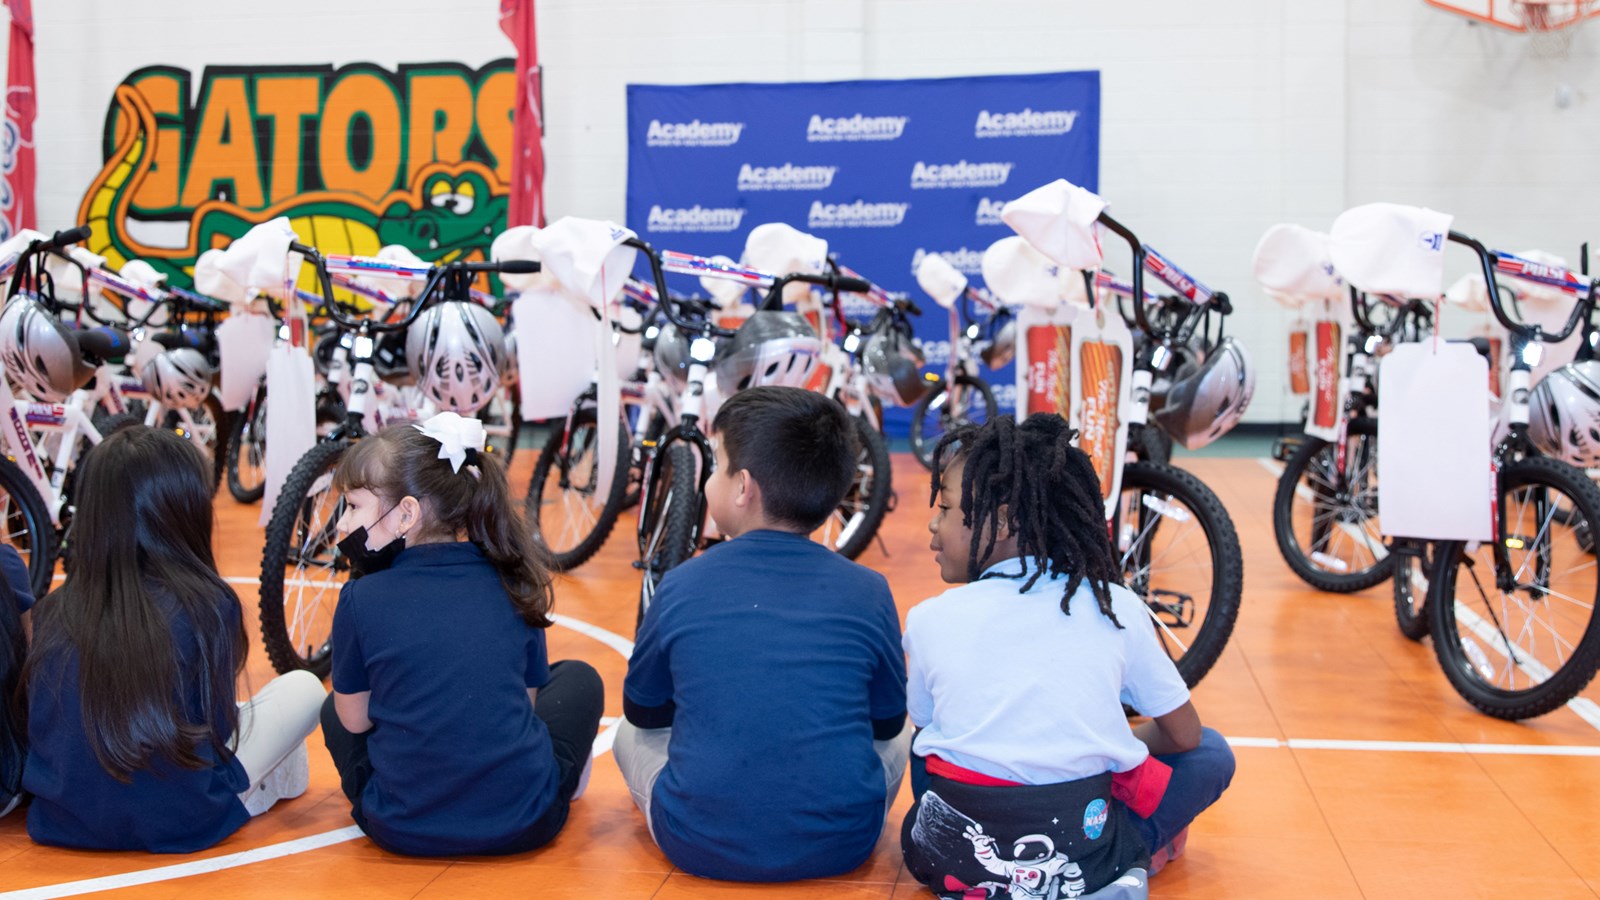 Season of Giving Continues: Academy Sports Gives 100 Bikes to